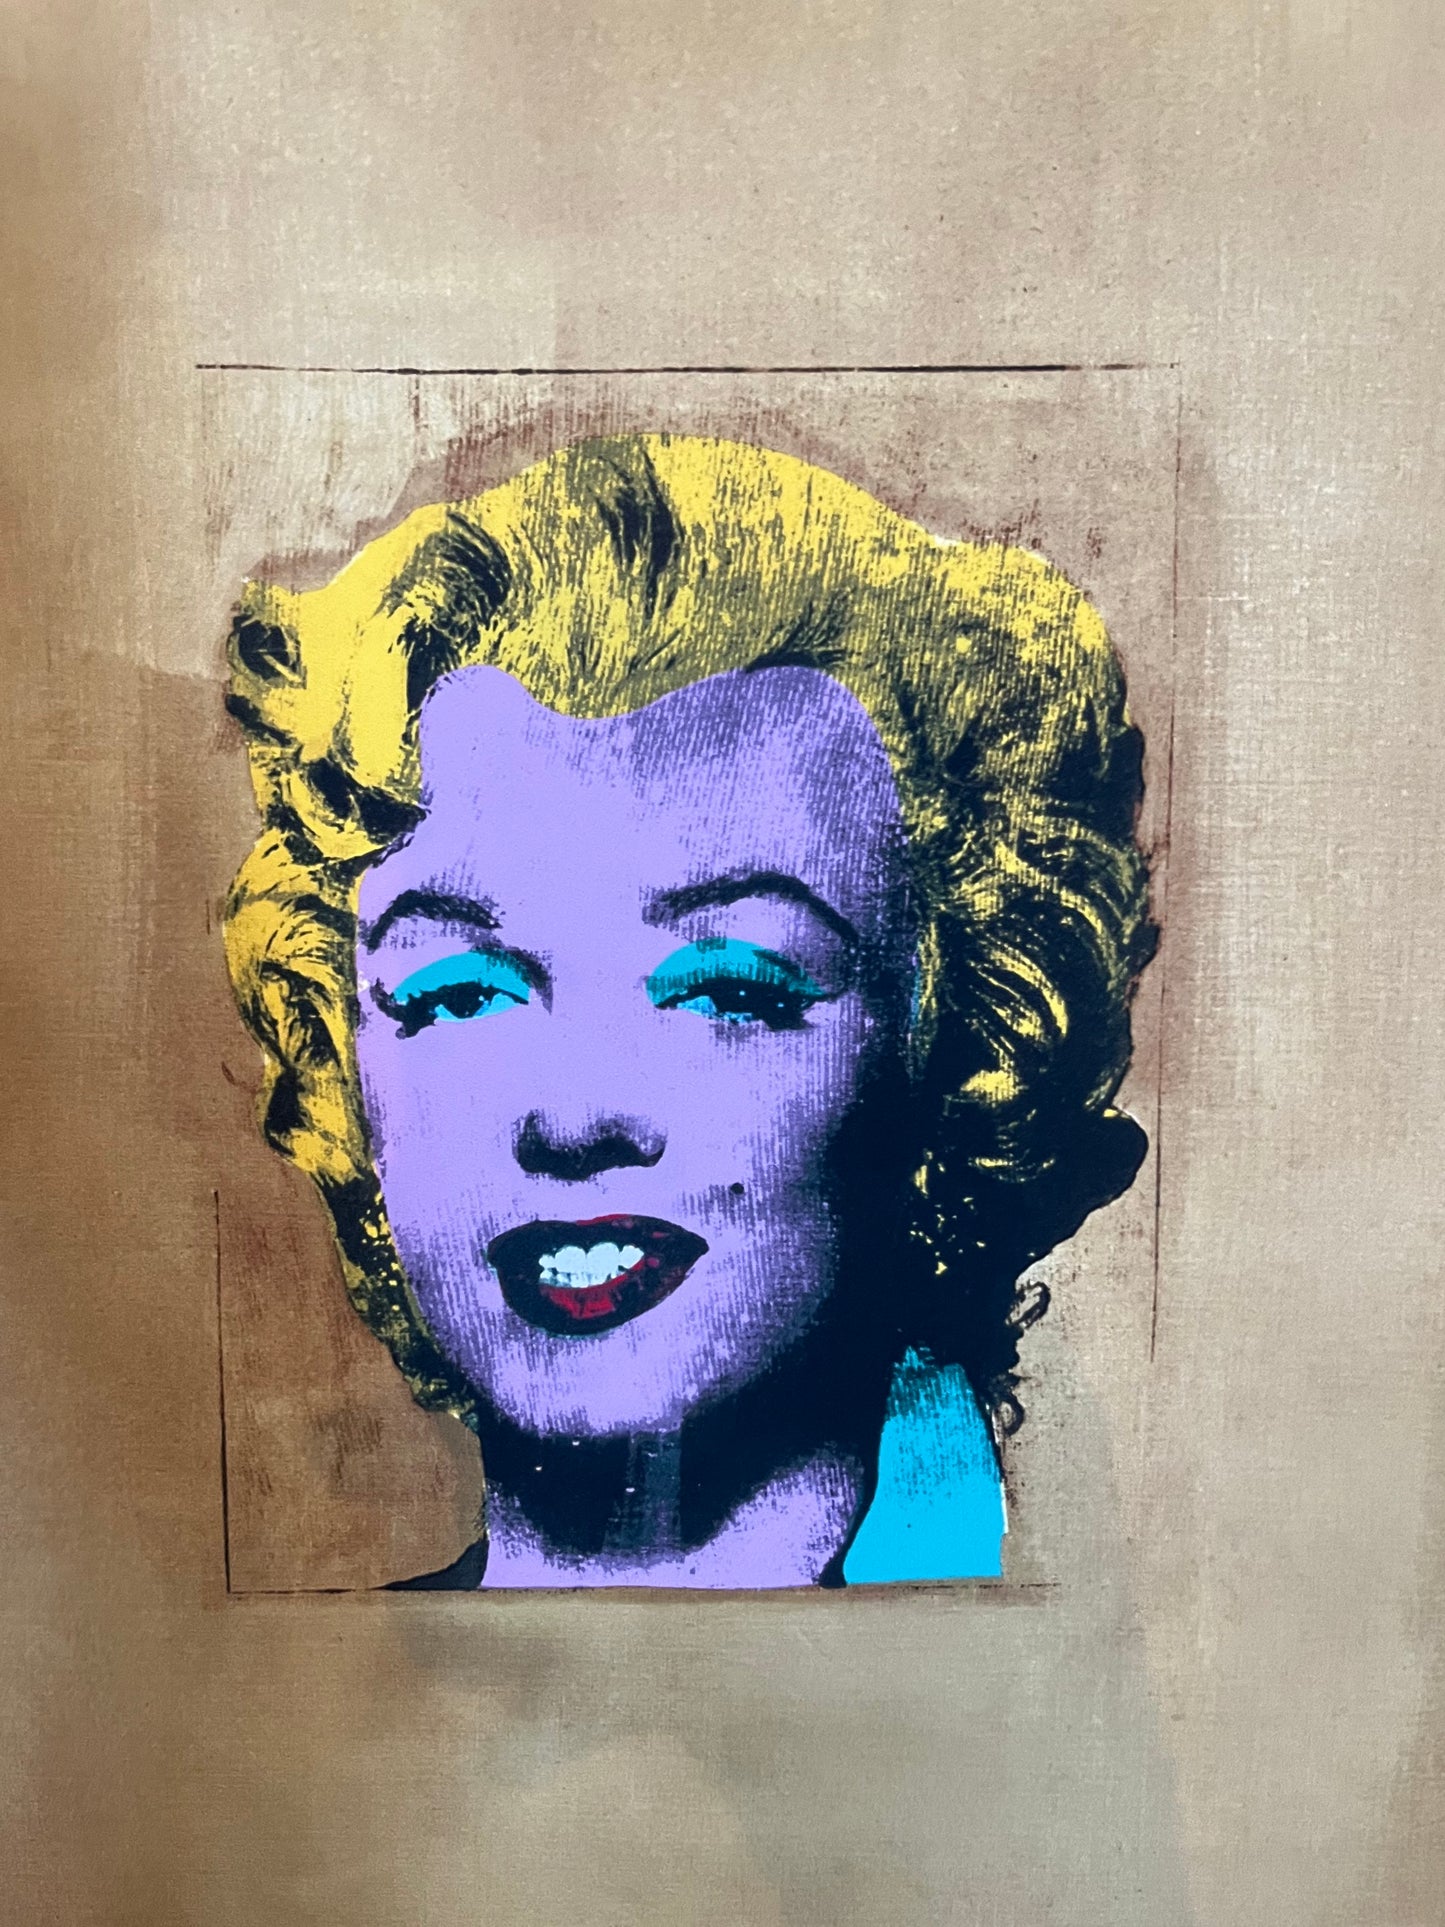 Andy Warhol, Gold Marilyn Monroe, 1962, Offset Lithograph